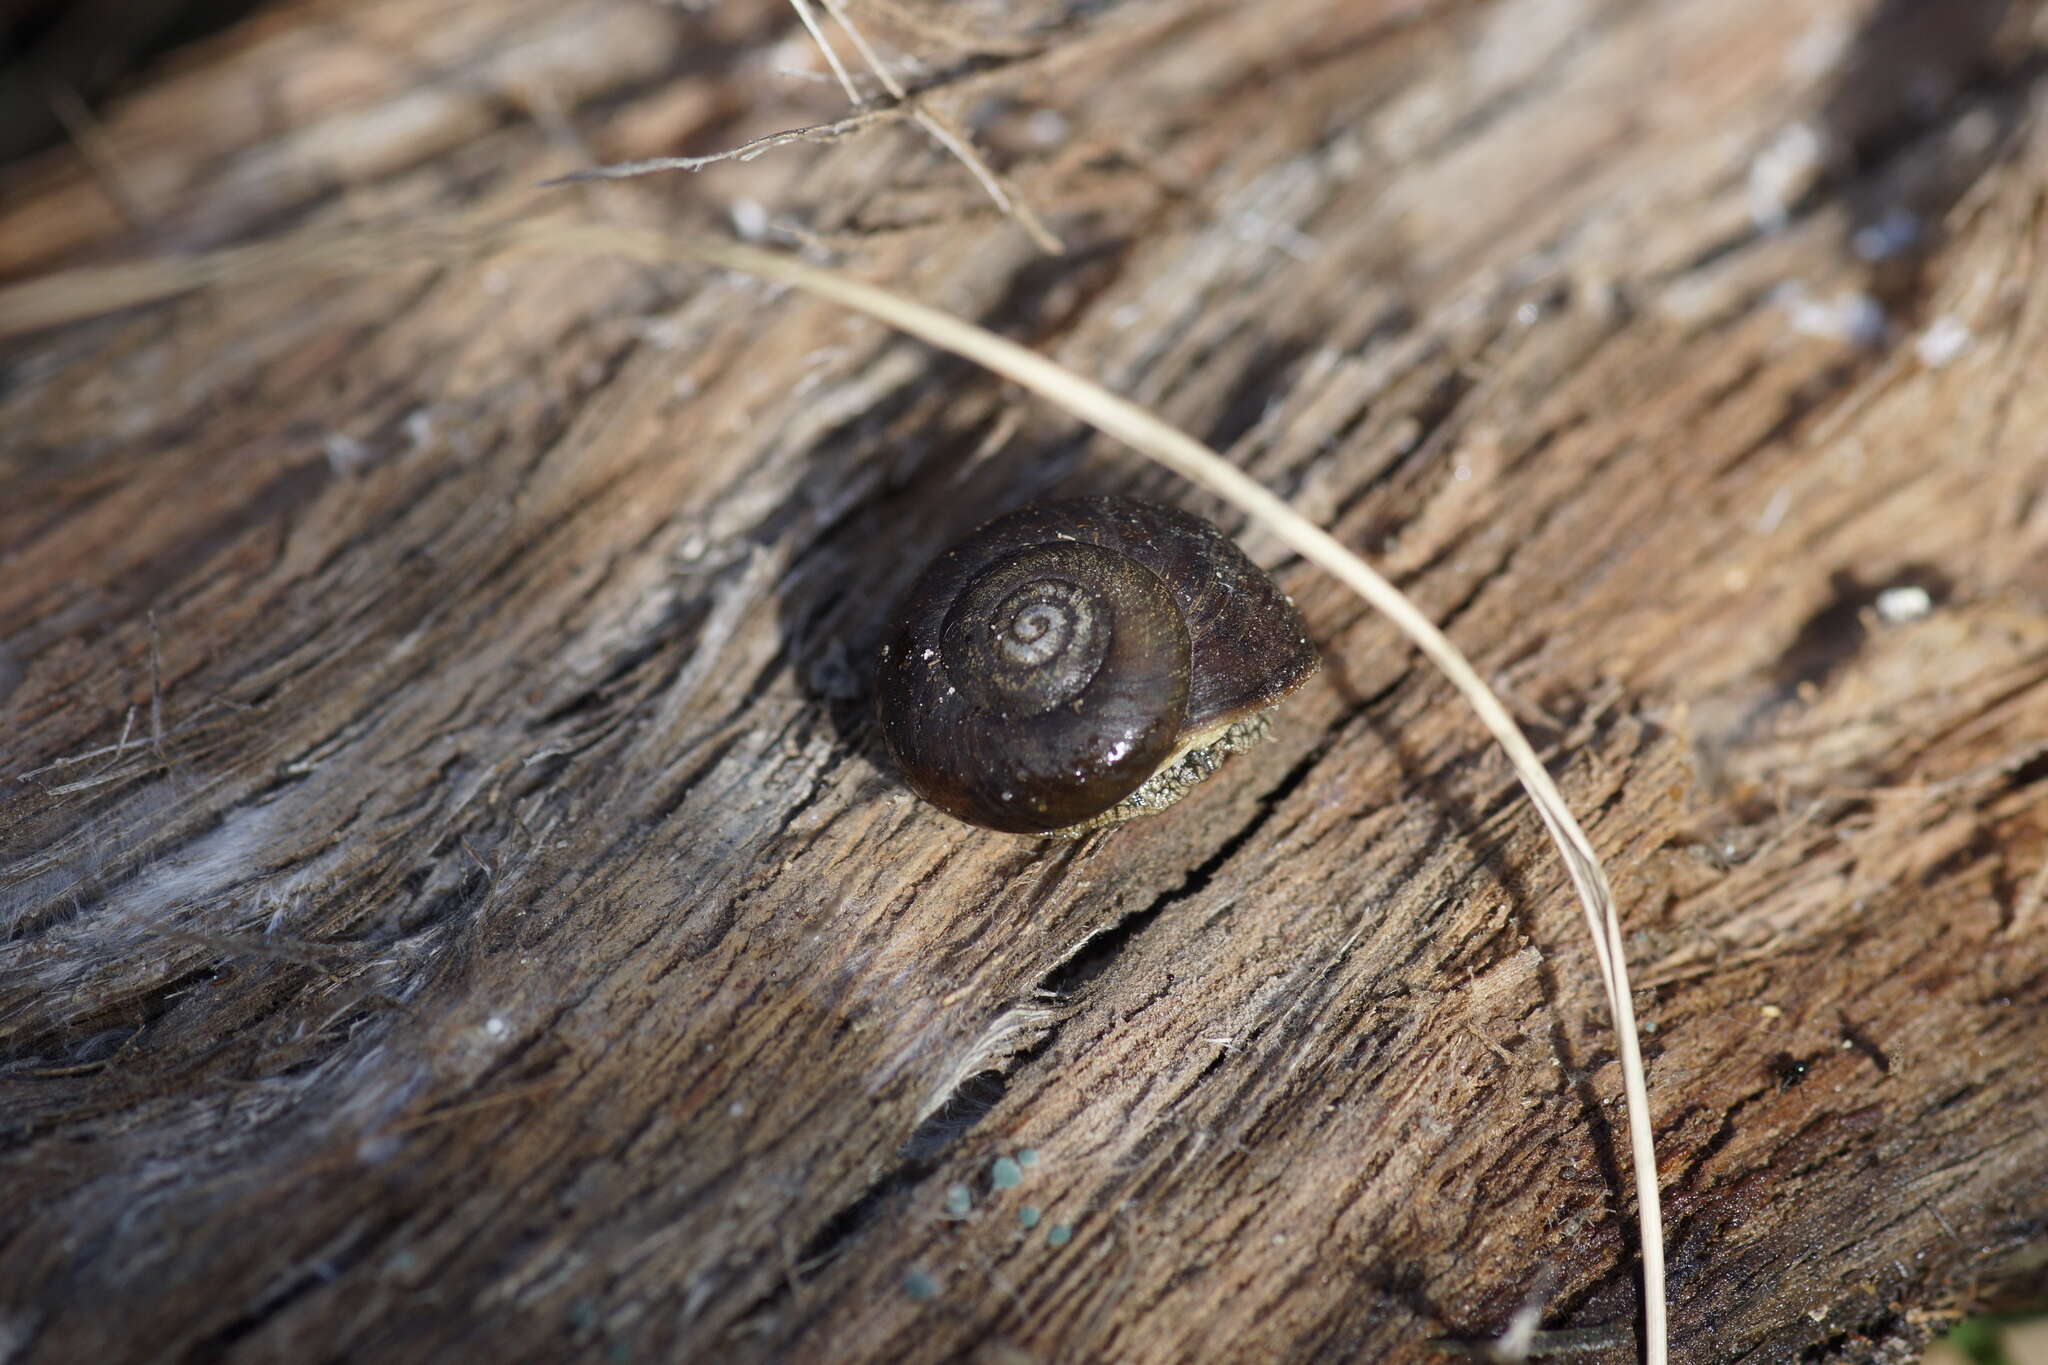 Image of southern hairy red snail